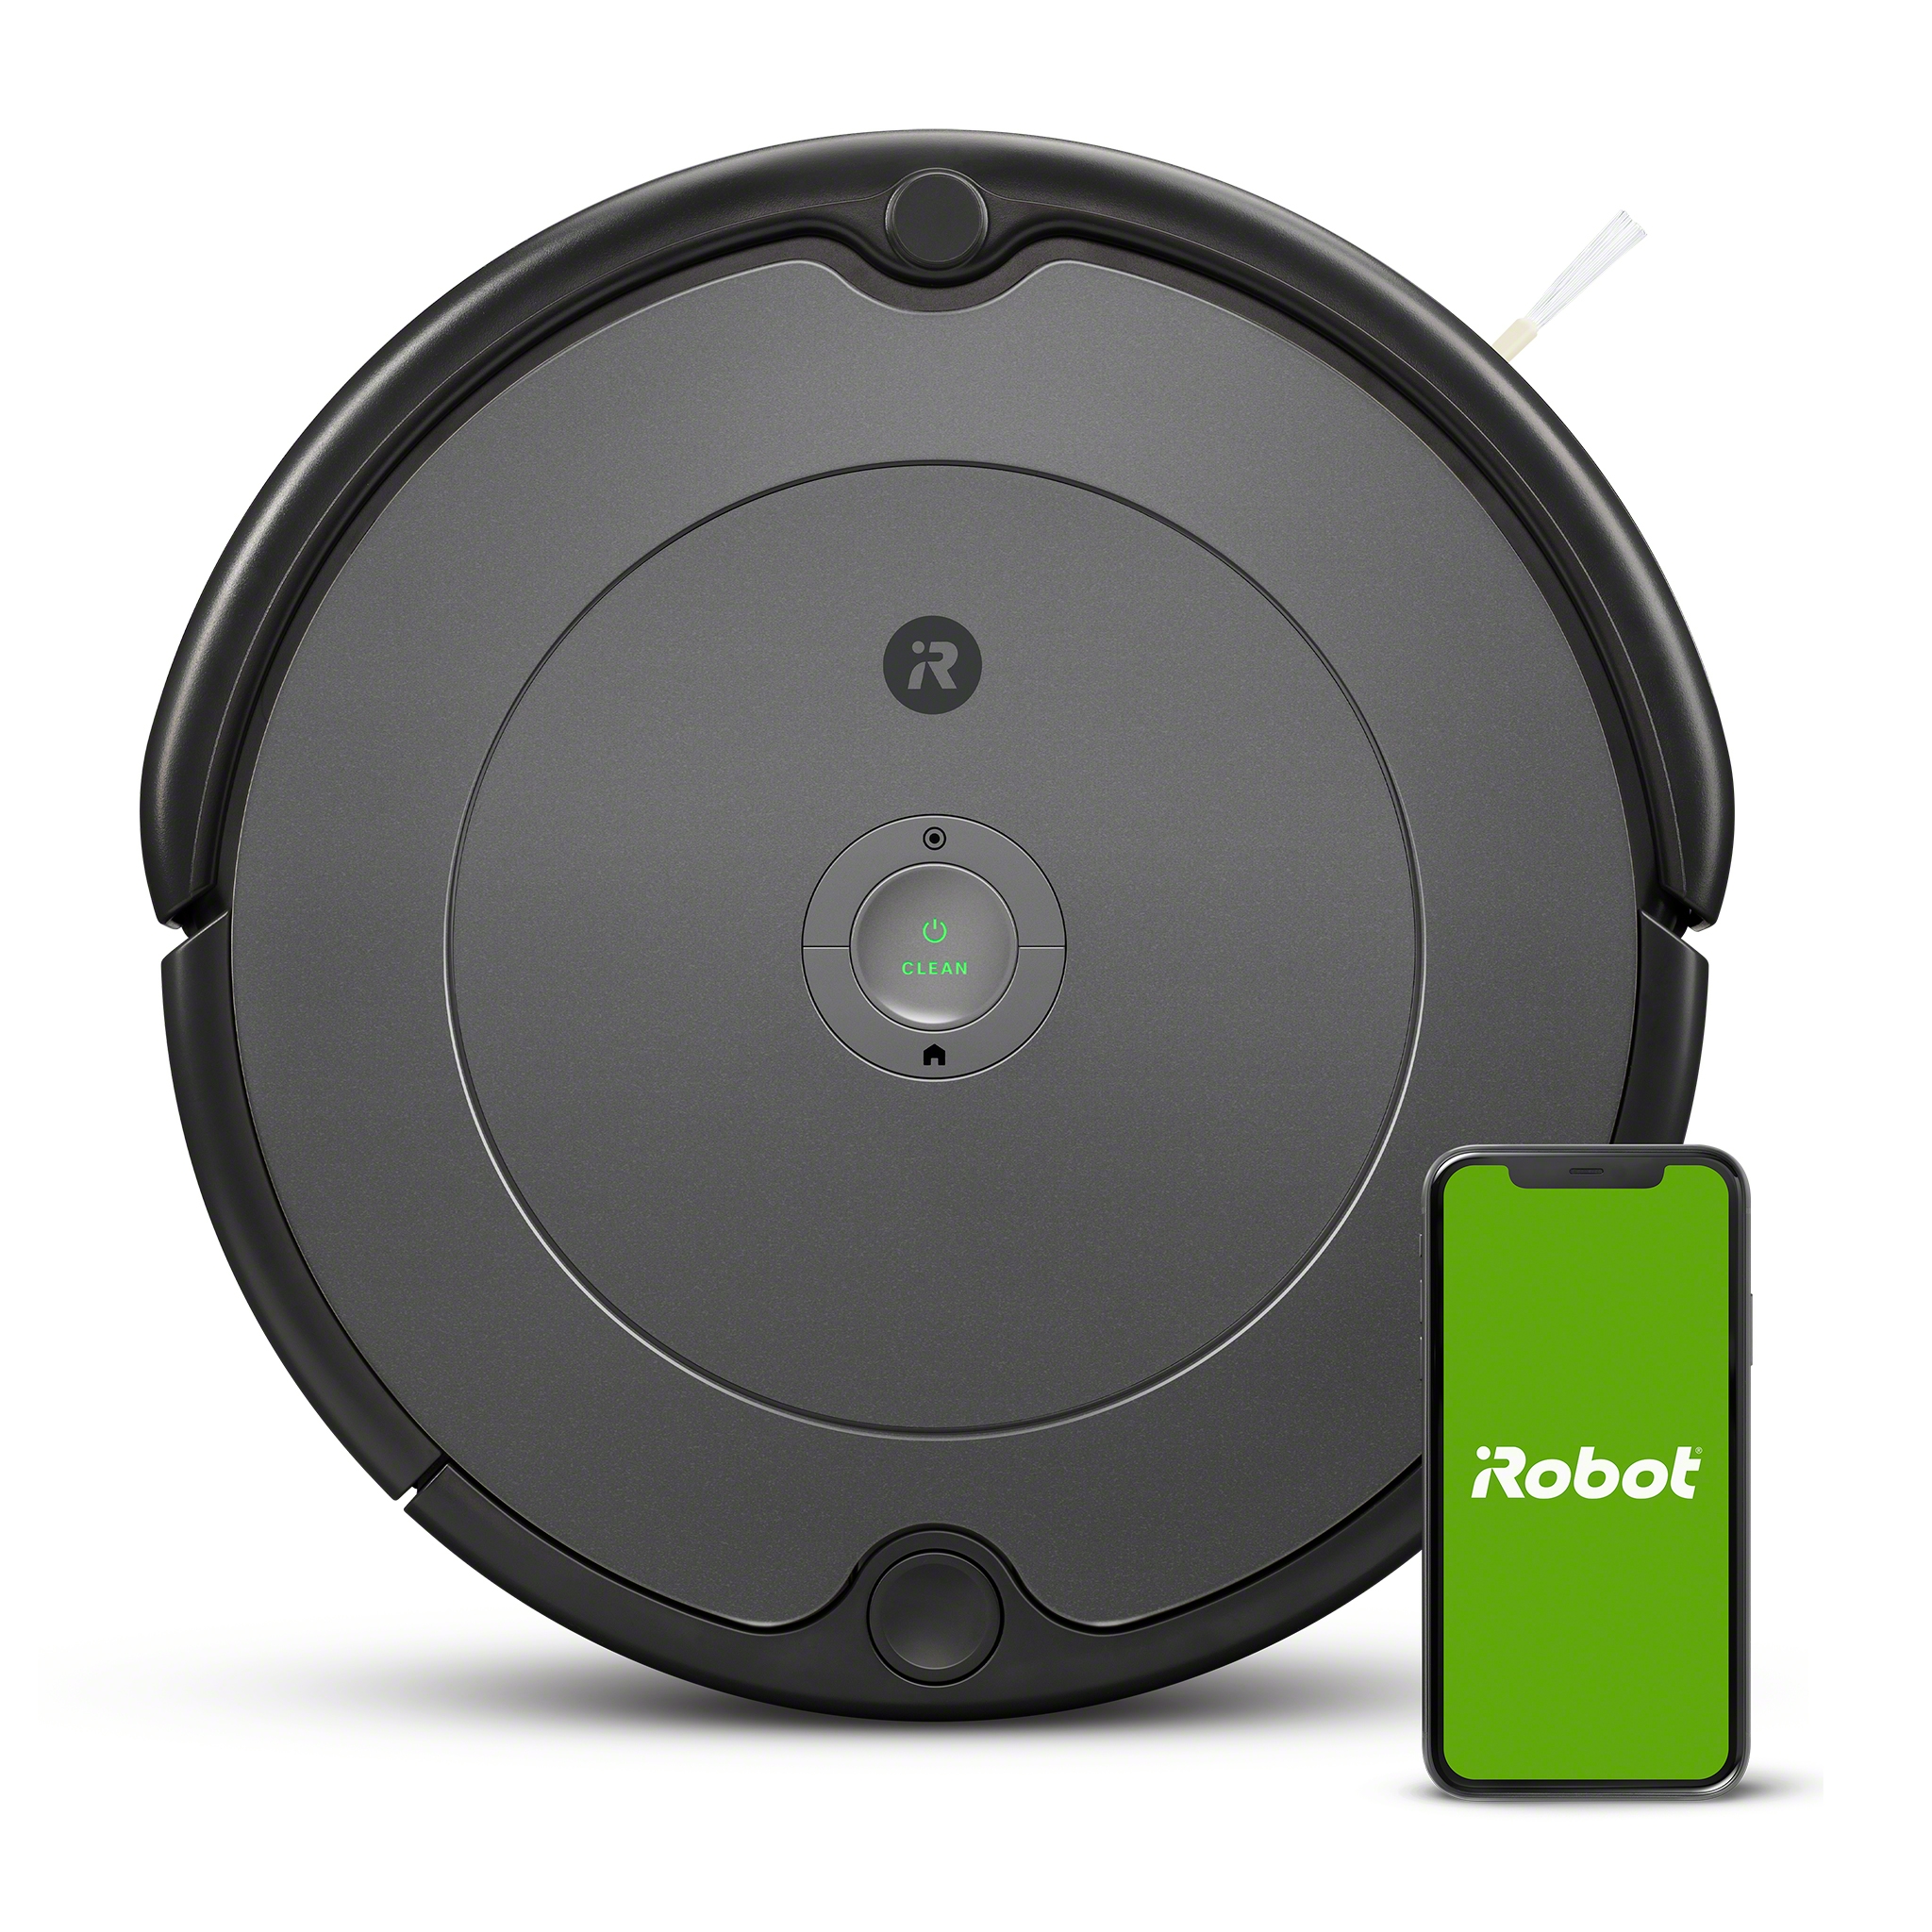 iRobot® Roomba® 676 Robot Vacuum-Wi-Fi Connectivity, Personalized Cleaning Recommendations, Works with Google, Good for Pet Hair, Carpets, Hard Floors, Self-Charging - image 1 of 15